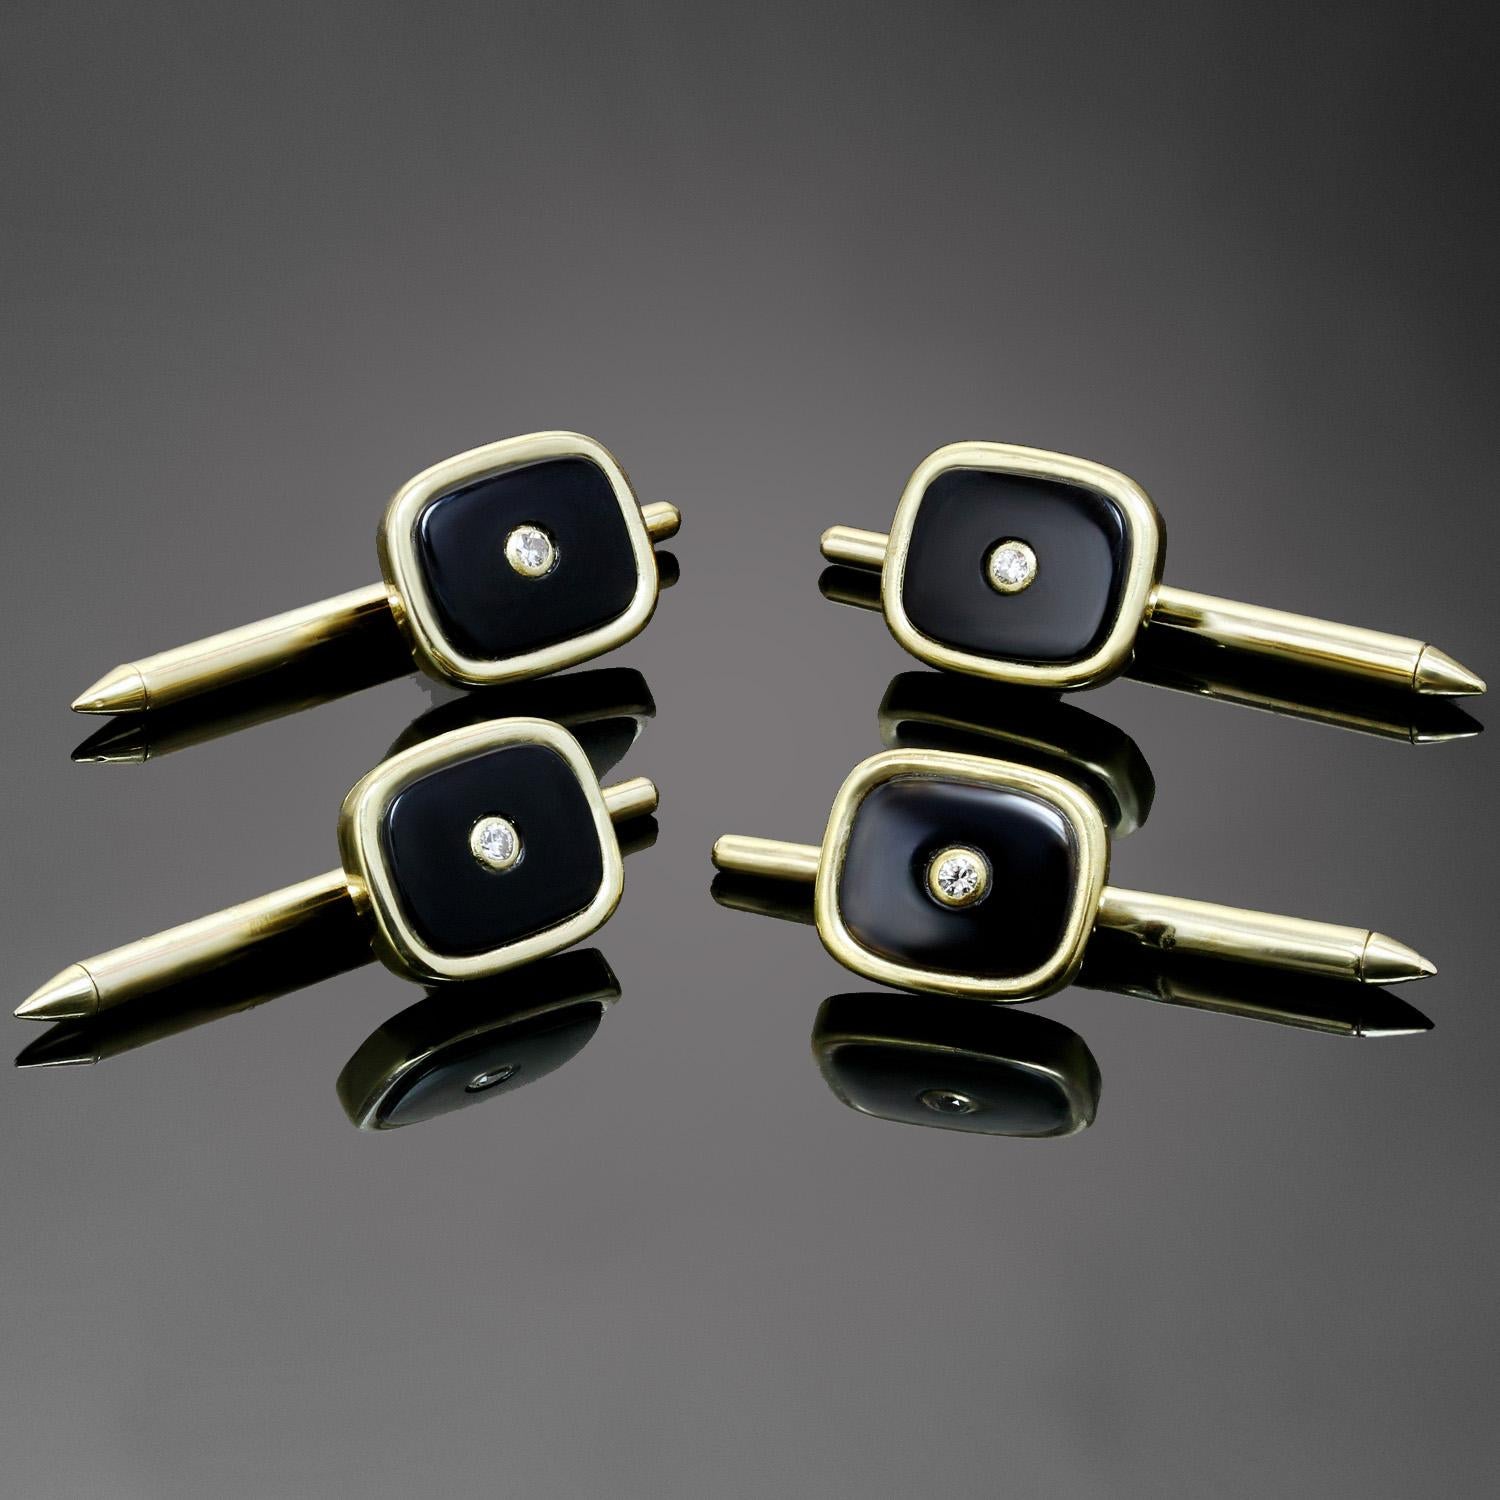 This classic vintage 1950s set of 4 rectangular button studs for men is crafted in 18k yellow gold and set with black onyx and brilliant-cut round diamond centers weighing an estimated 0.12 carats. Completed with makers mark GJ and stamp 750 for 18k